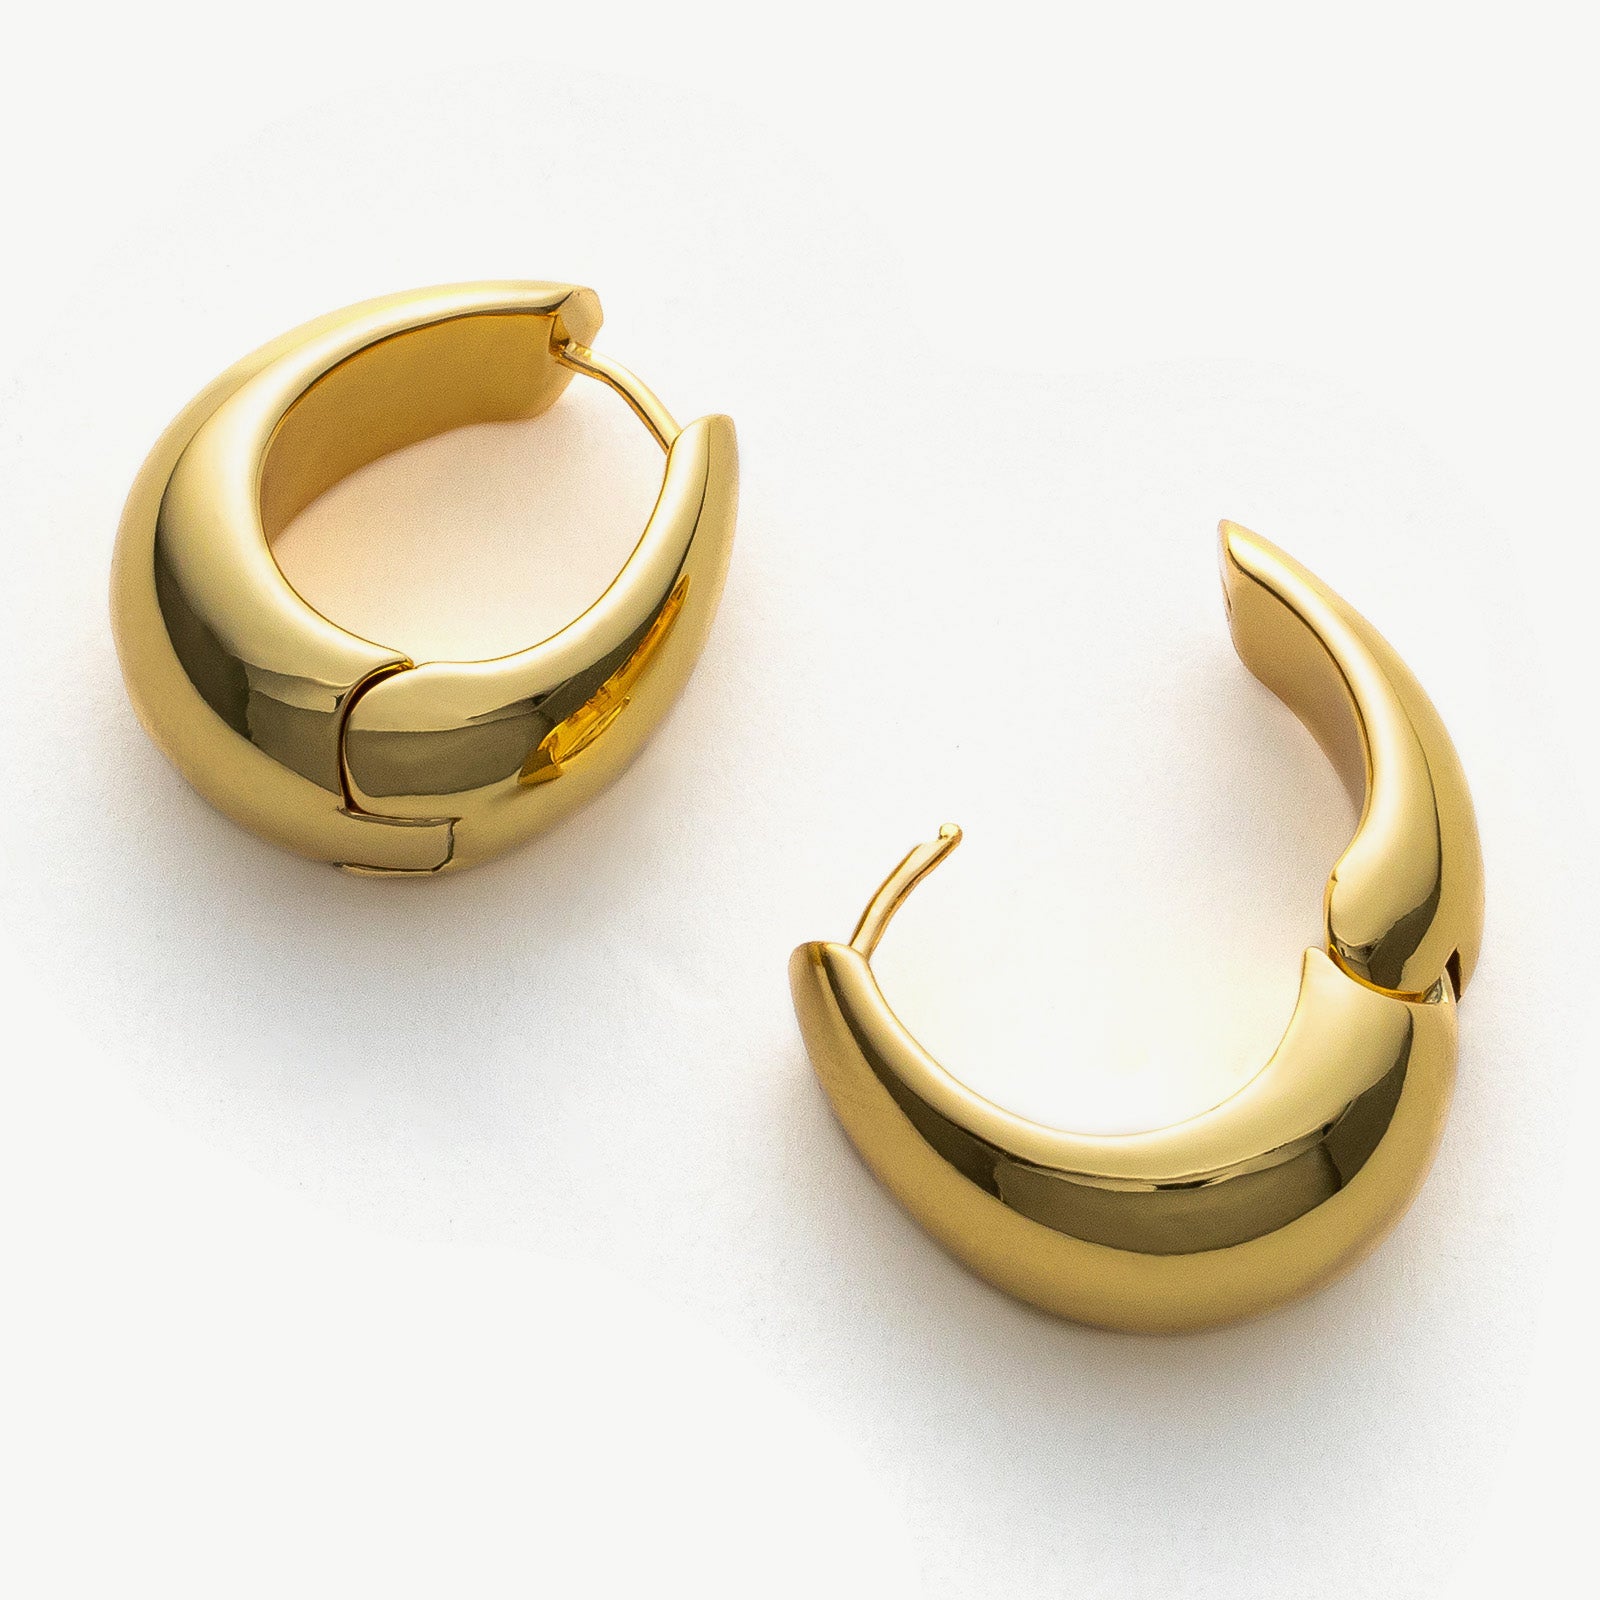 Dome-shaped Hoop Earrings in Gold, adding a touch of golden glamour to your ensemble with their bold and eye-catching design